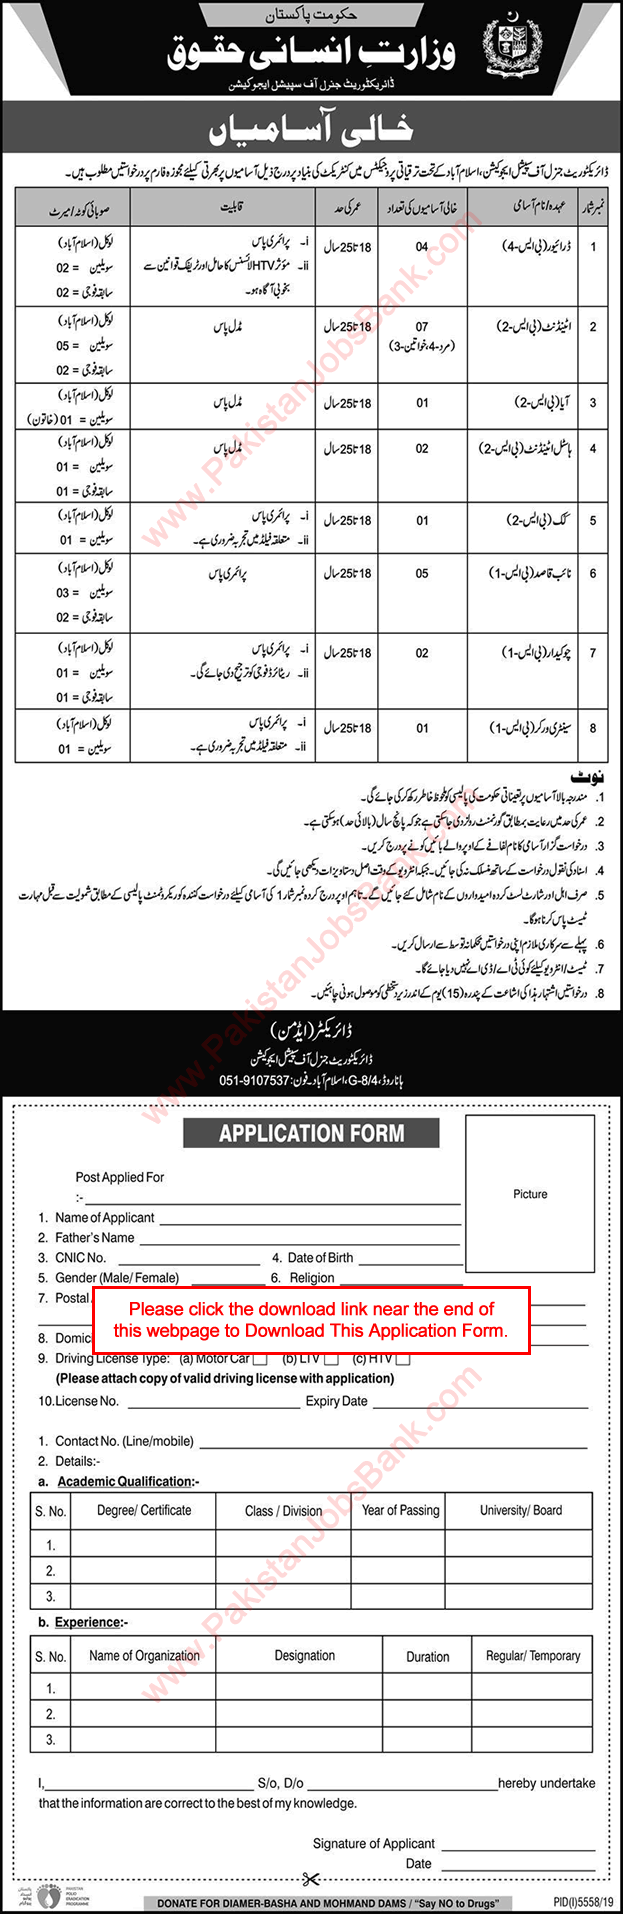 Ministry of Human Rights Jobs 2020 April Application Form Directorate General of Special Education Latest